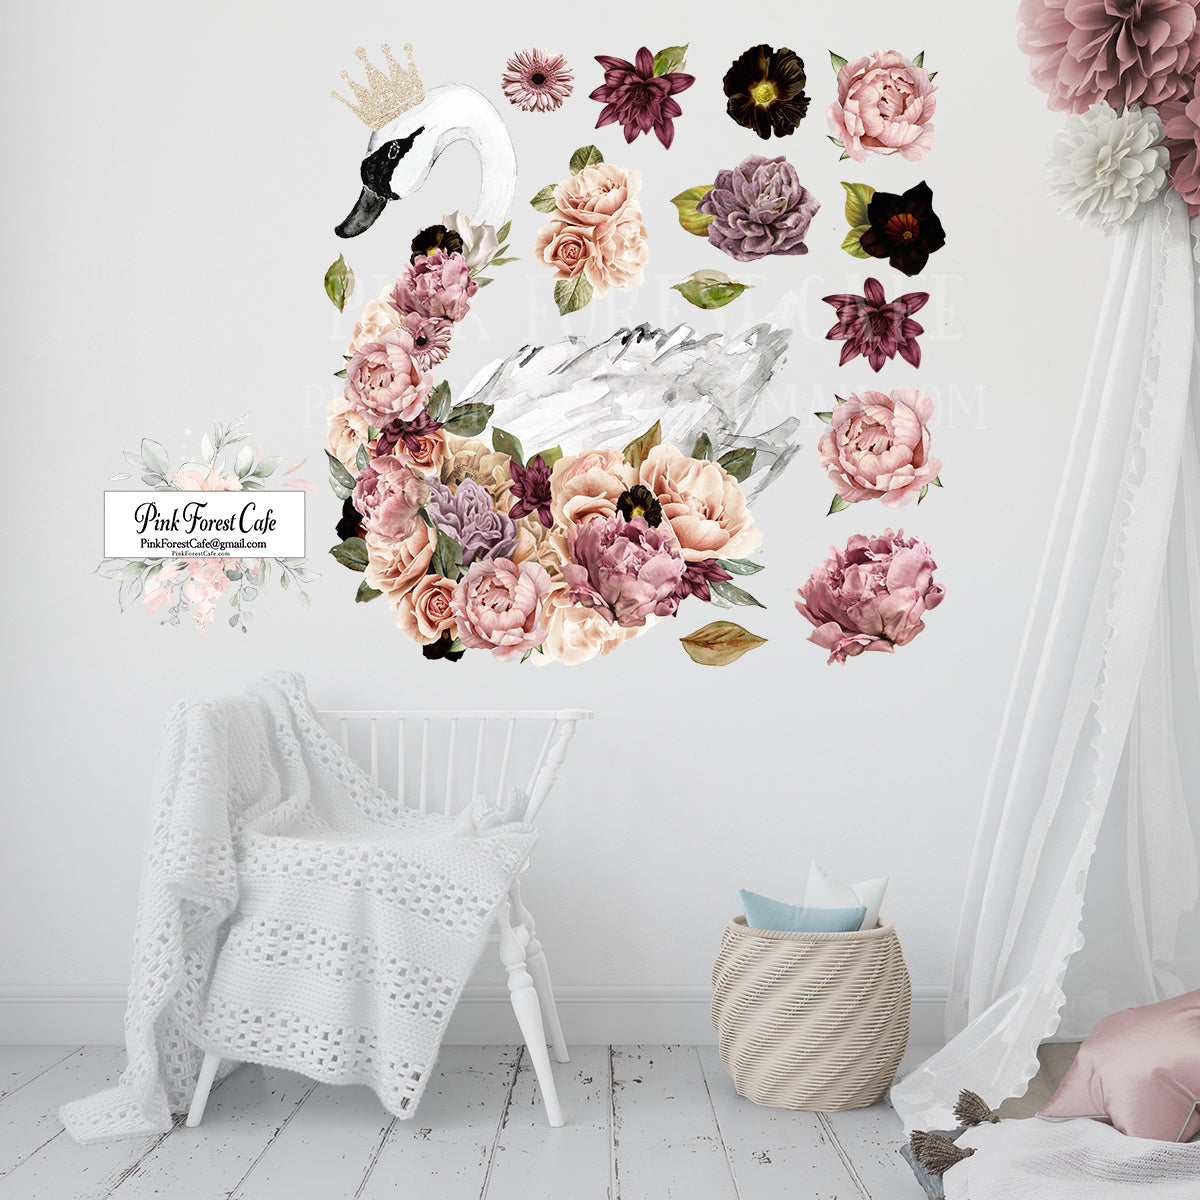 Floral Wall Decals, Flower Decals, Nursery Wall Decals, Flower Wall Stickers,  Pink Girls Wall Decals, Wall Stickers, Wall Murals, Nursery 